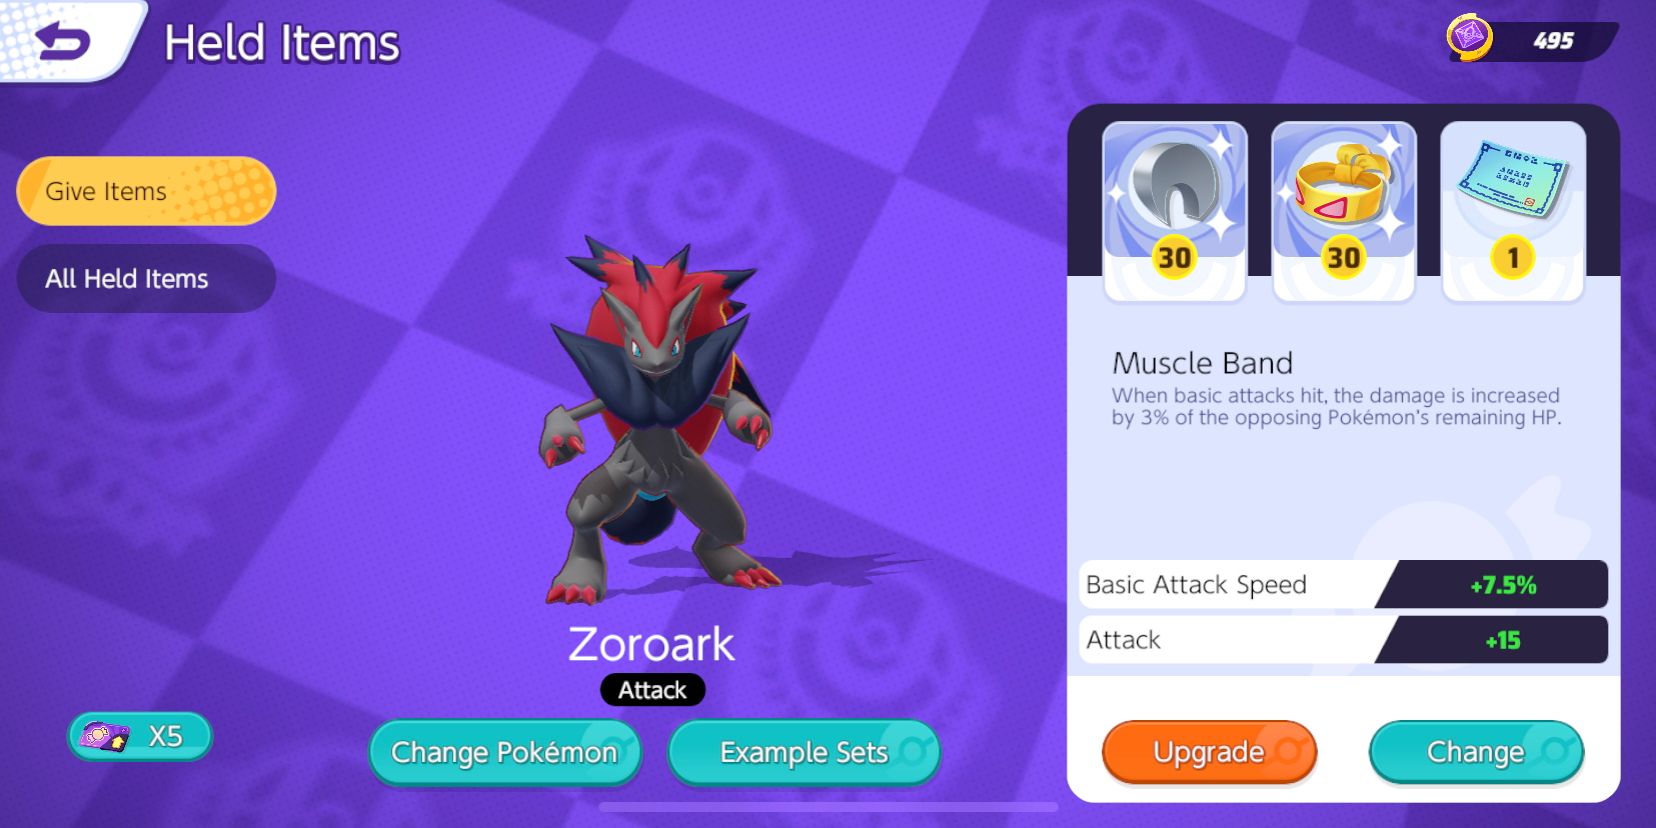 Zoroark Held Item customization screen with Razor Claw, Muscle Band, and Weakness Policy selected